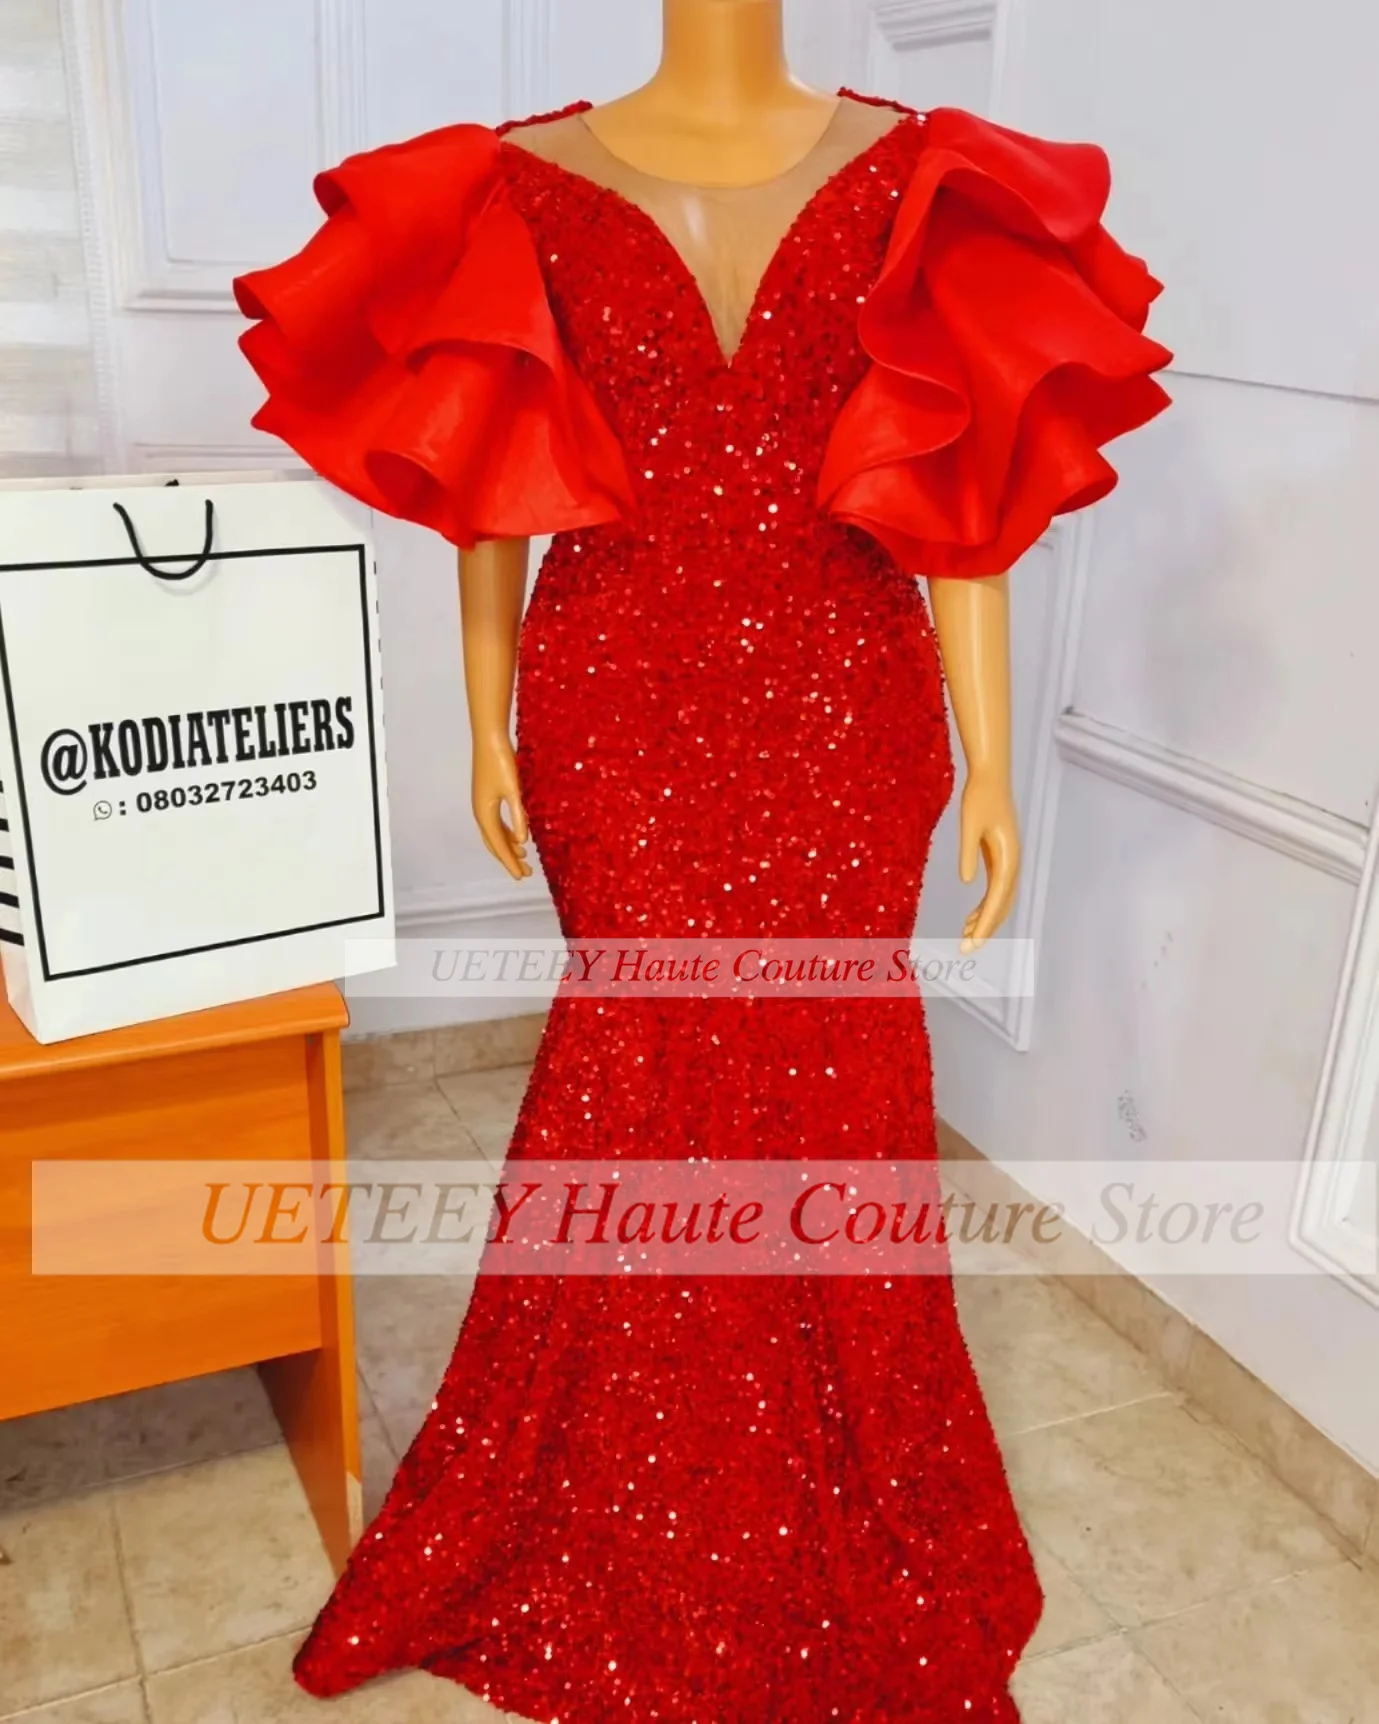 

Red Mermaid Prom Dress Sequined Lace O-Neck Short Sleeve Trumpet Follr-Length Celebrity Evening Party Gowns